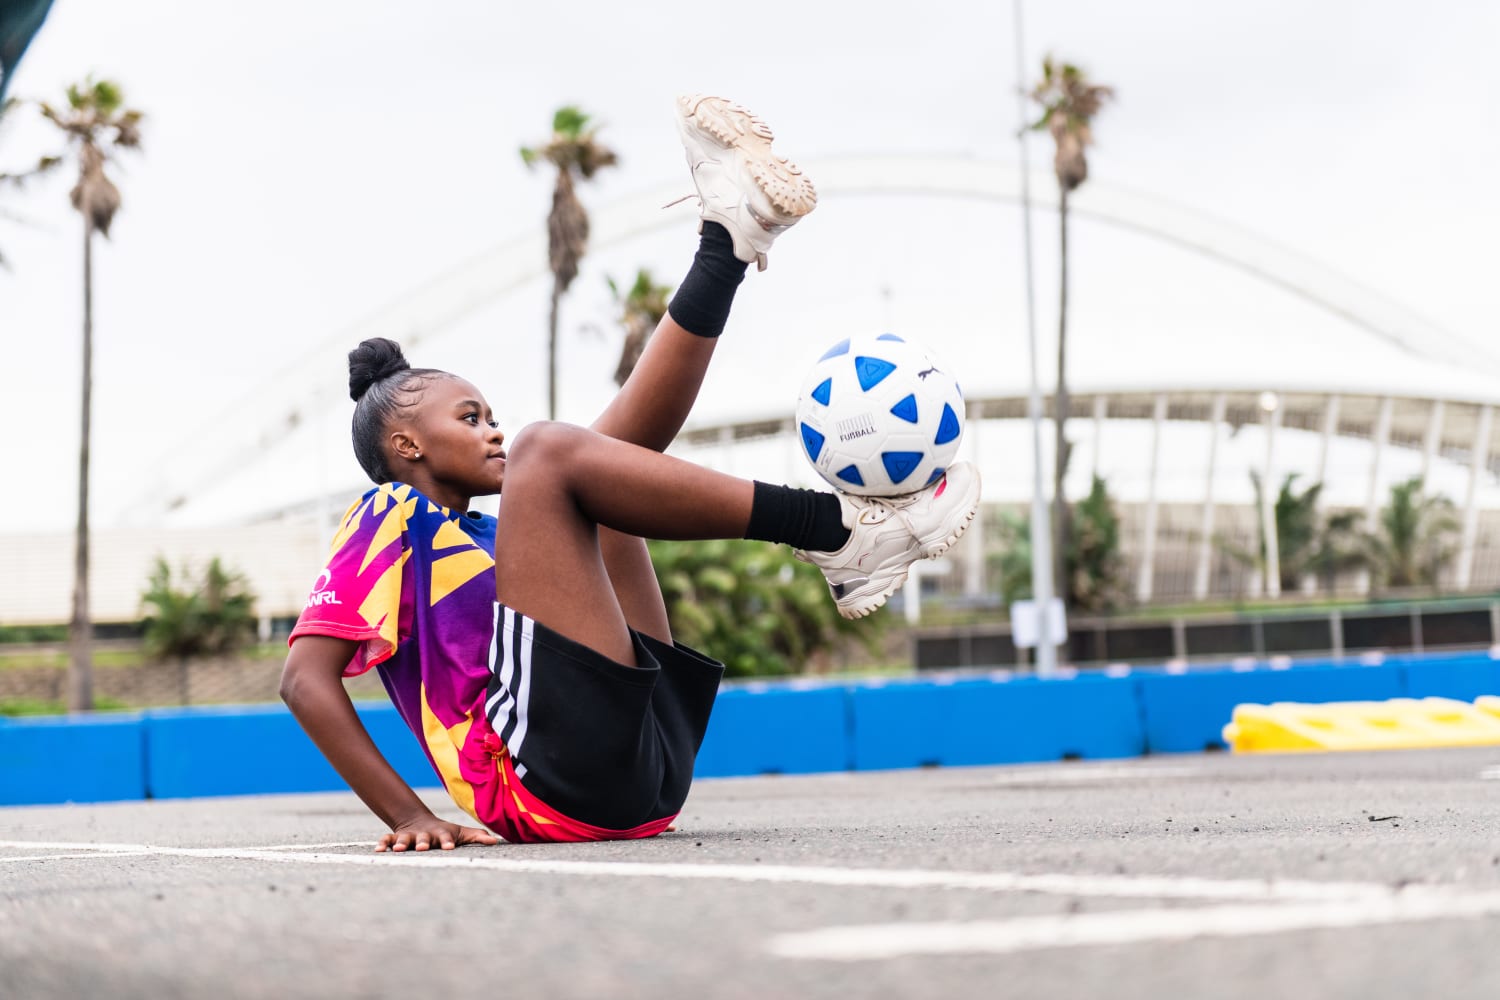 Futbolear Freestyle: The Artistry Behind the Ball